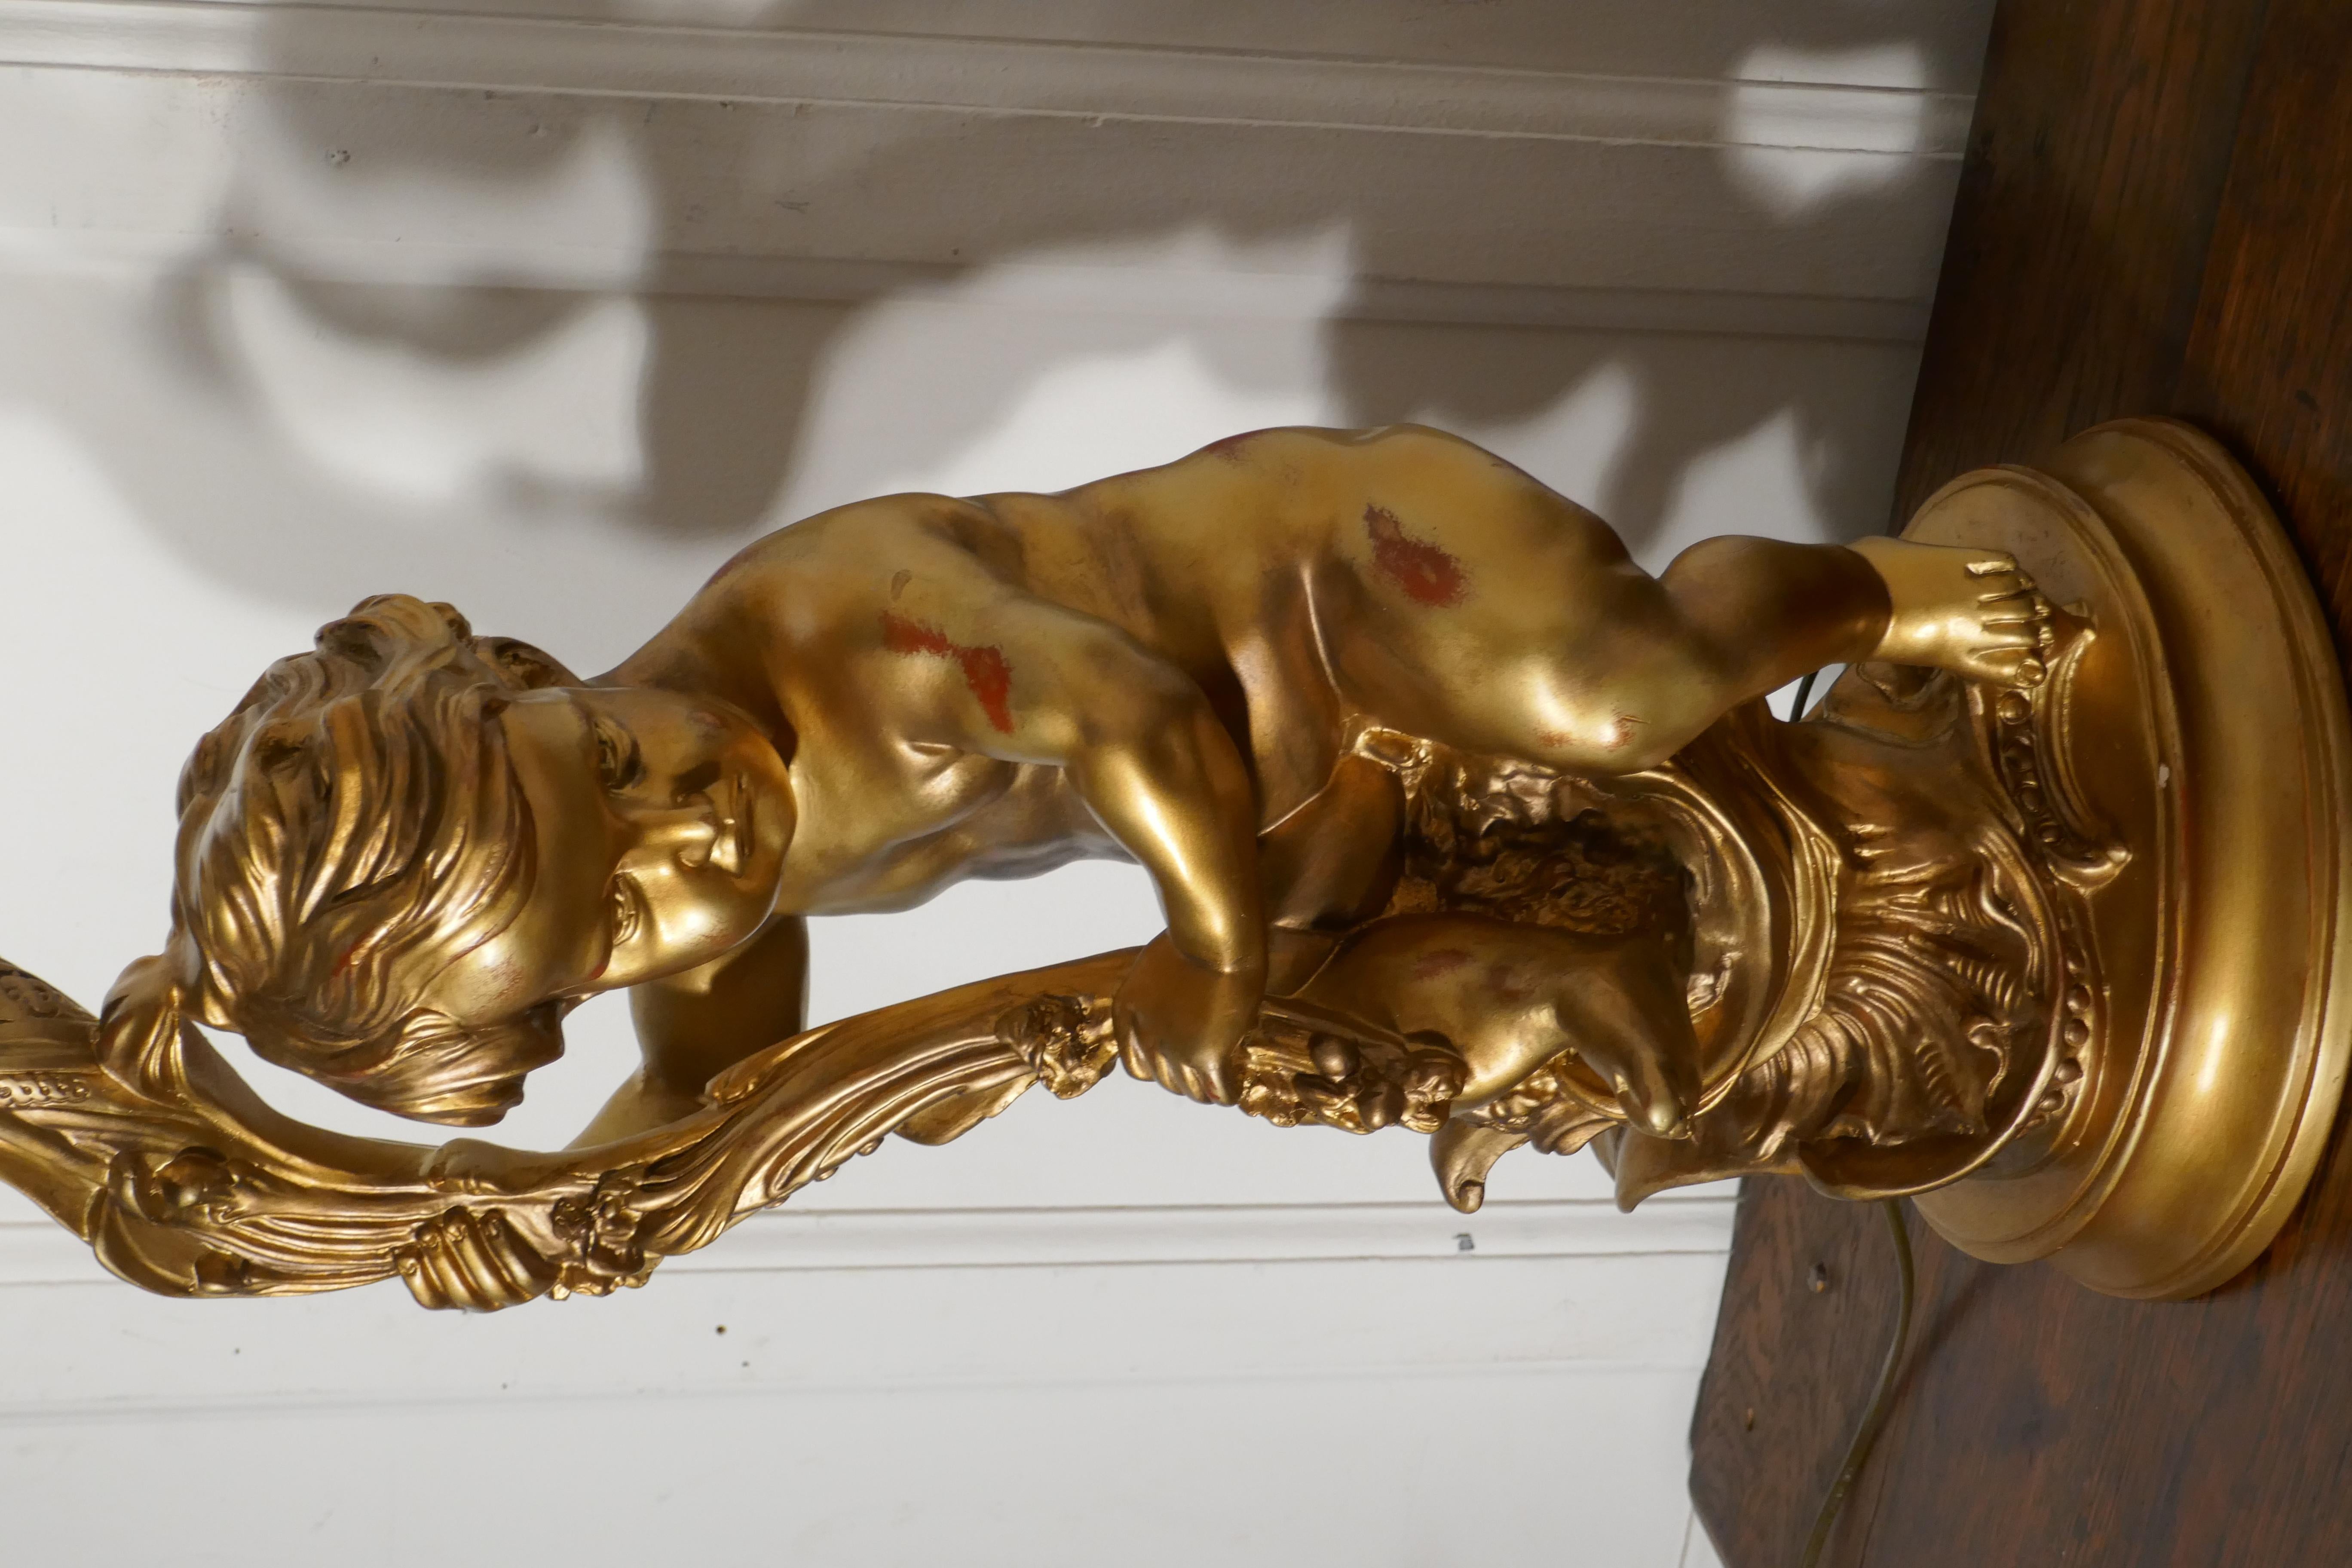 Huge Gilt Table Lamp in the form of a Cherub or Putti In Good Condition For Sale In Chillerton, Isle of Wight